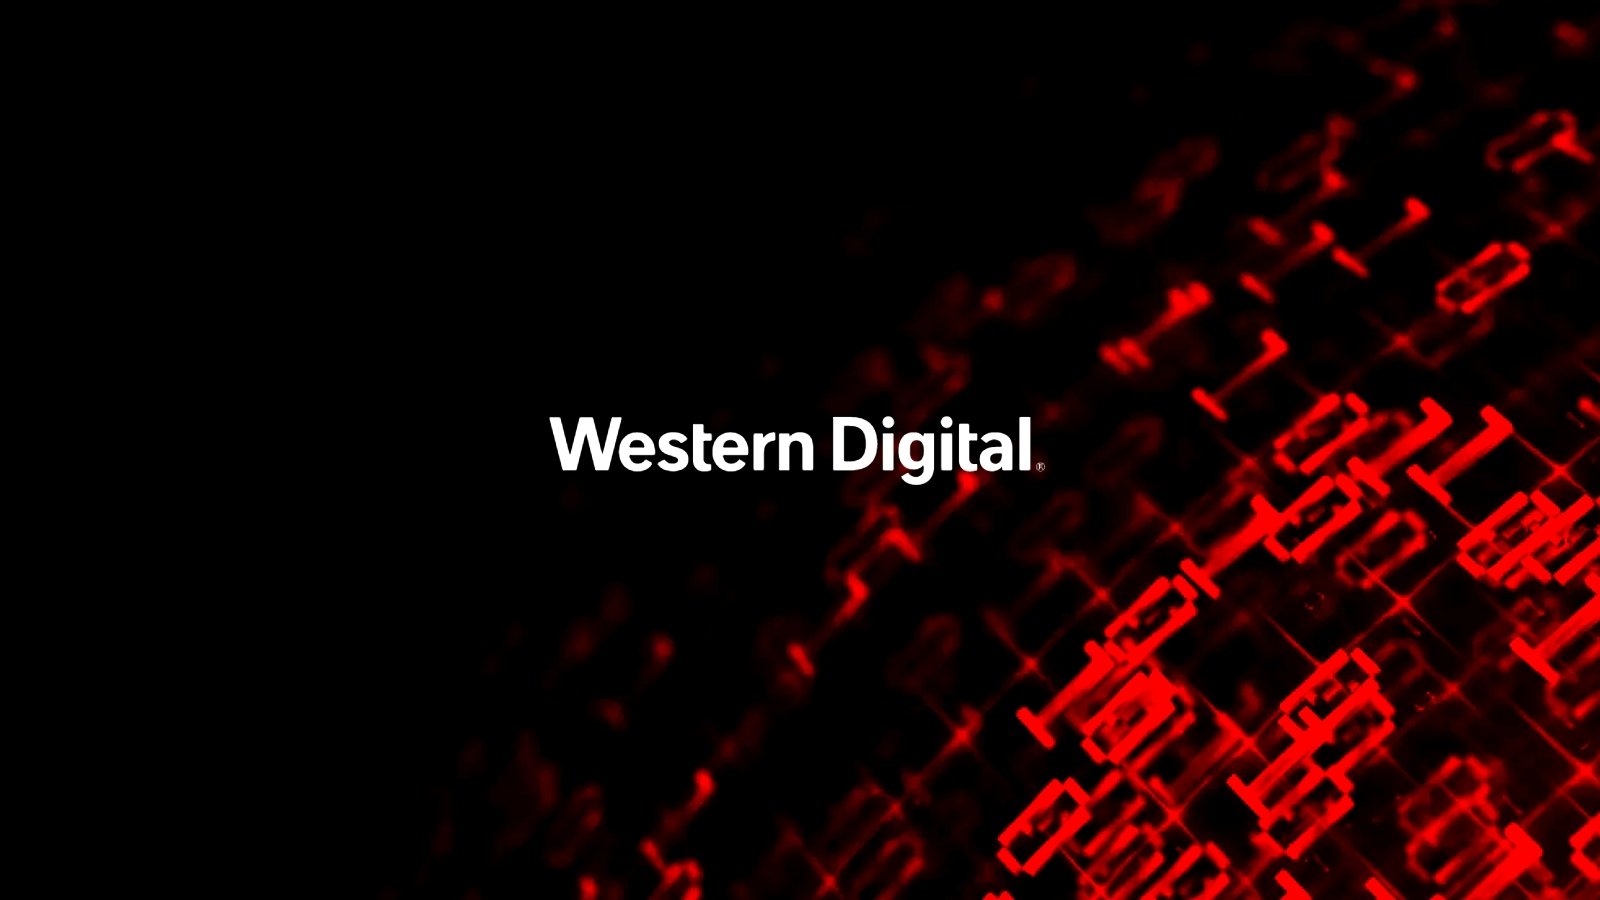 Hackers leak images to taunt Western Digital's cyberattack response